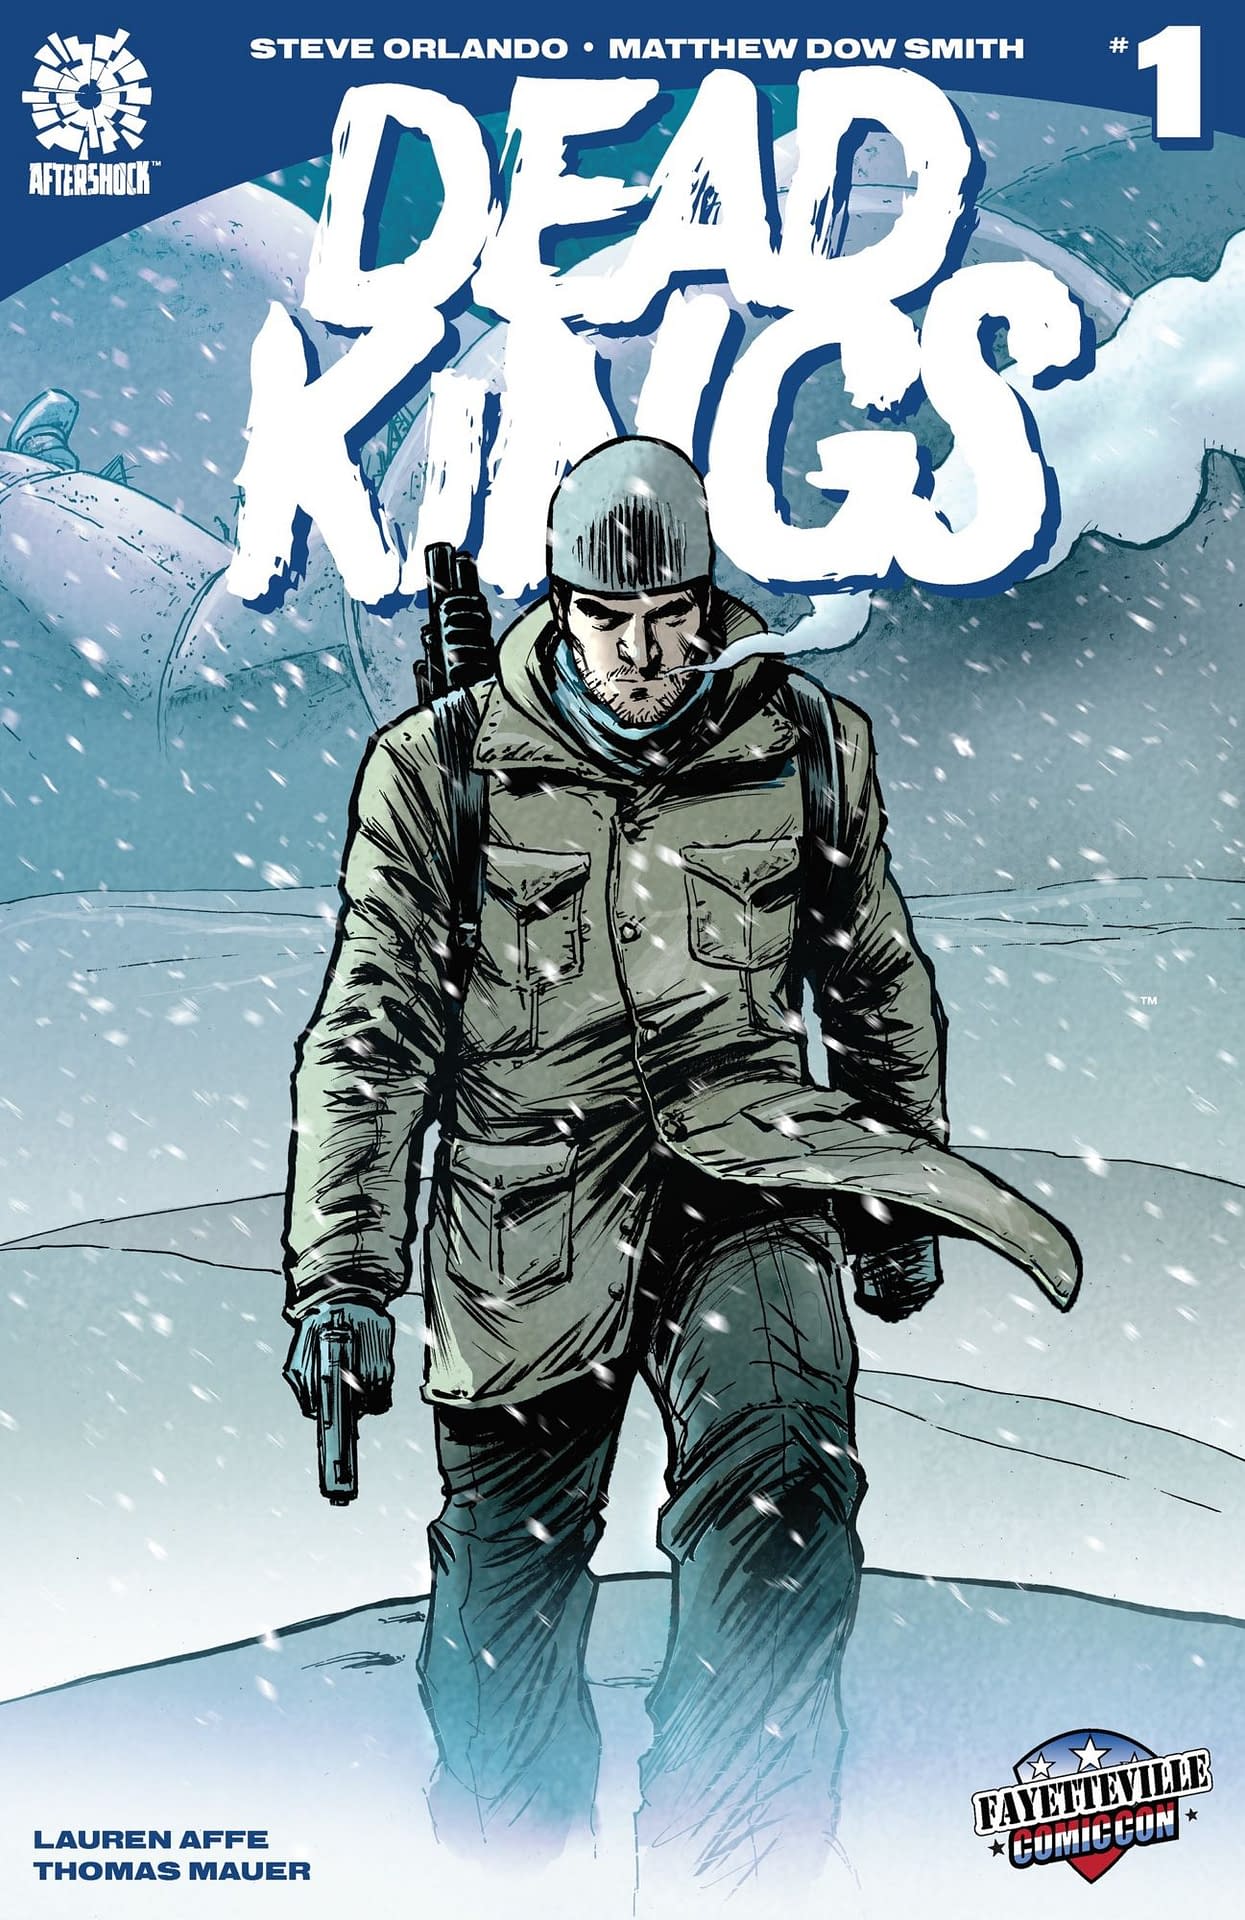 AfterShock to Debut War Comic Dead Kings #1 at Fort Bragg's Closest Fayetteville Comic Con Weekend